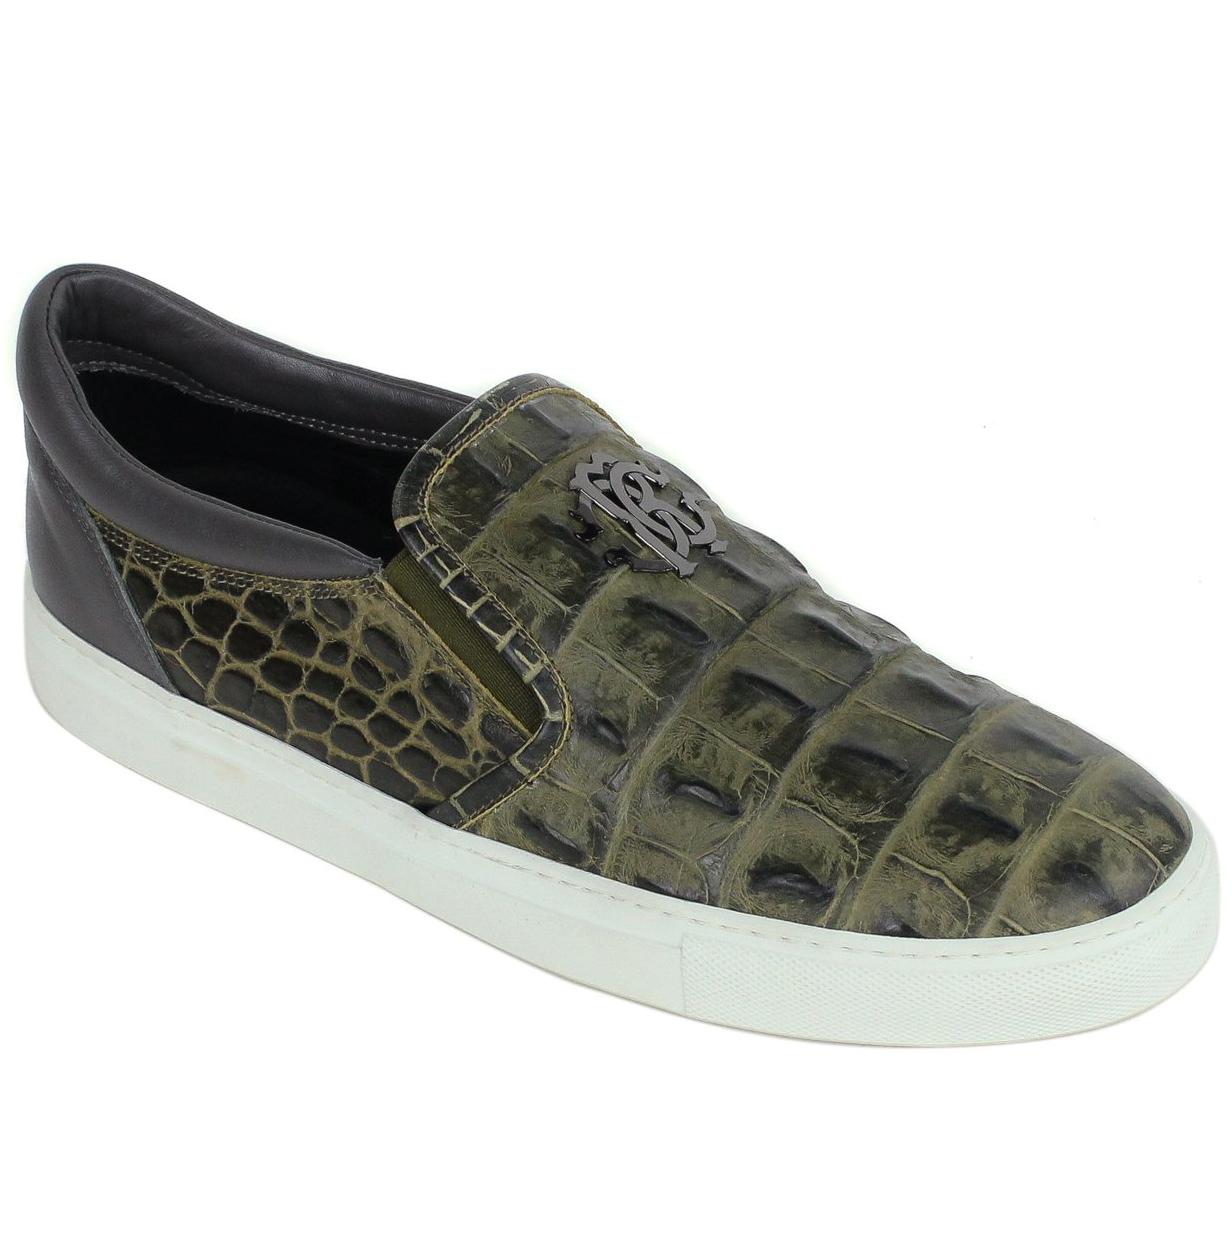 Roberto Cavalli Olive Green Croc Embossed Leather Slip Ons For Sale